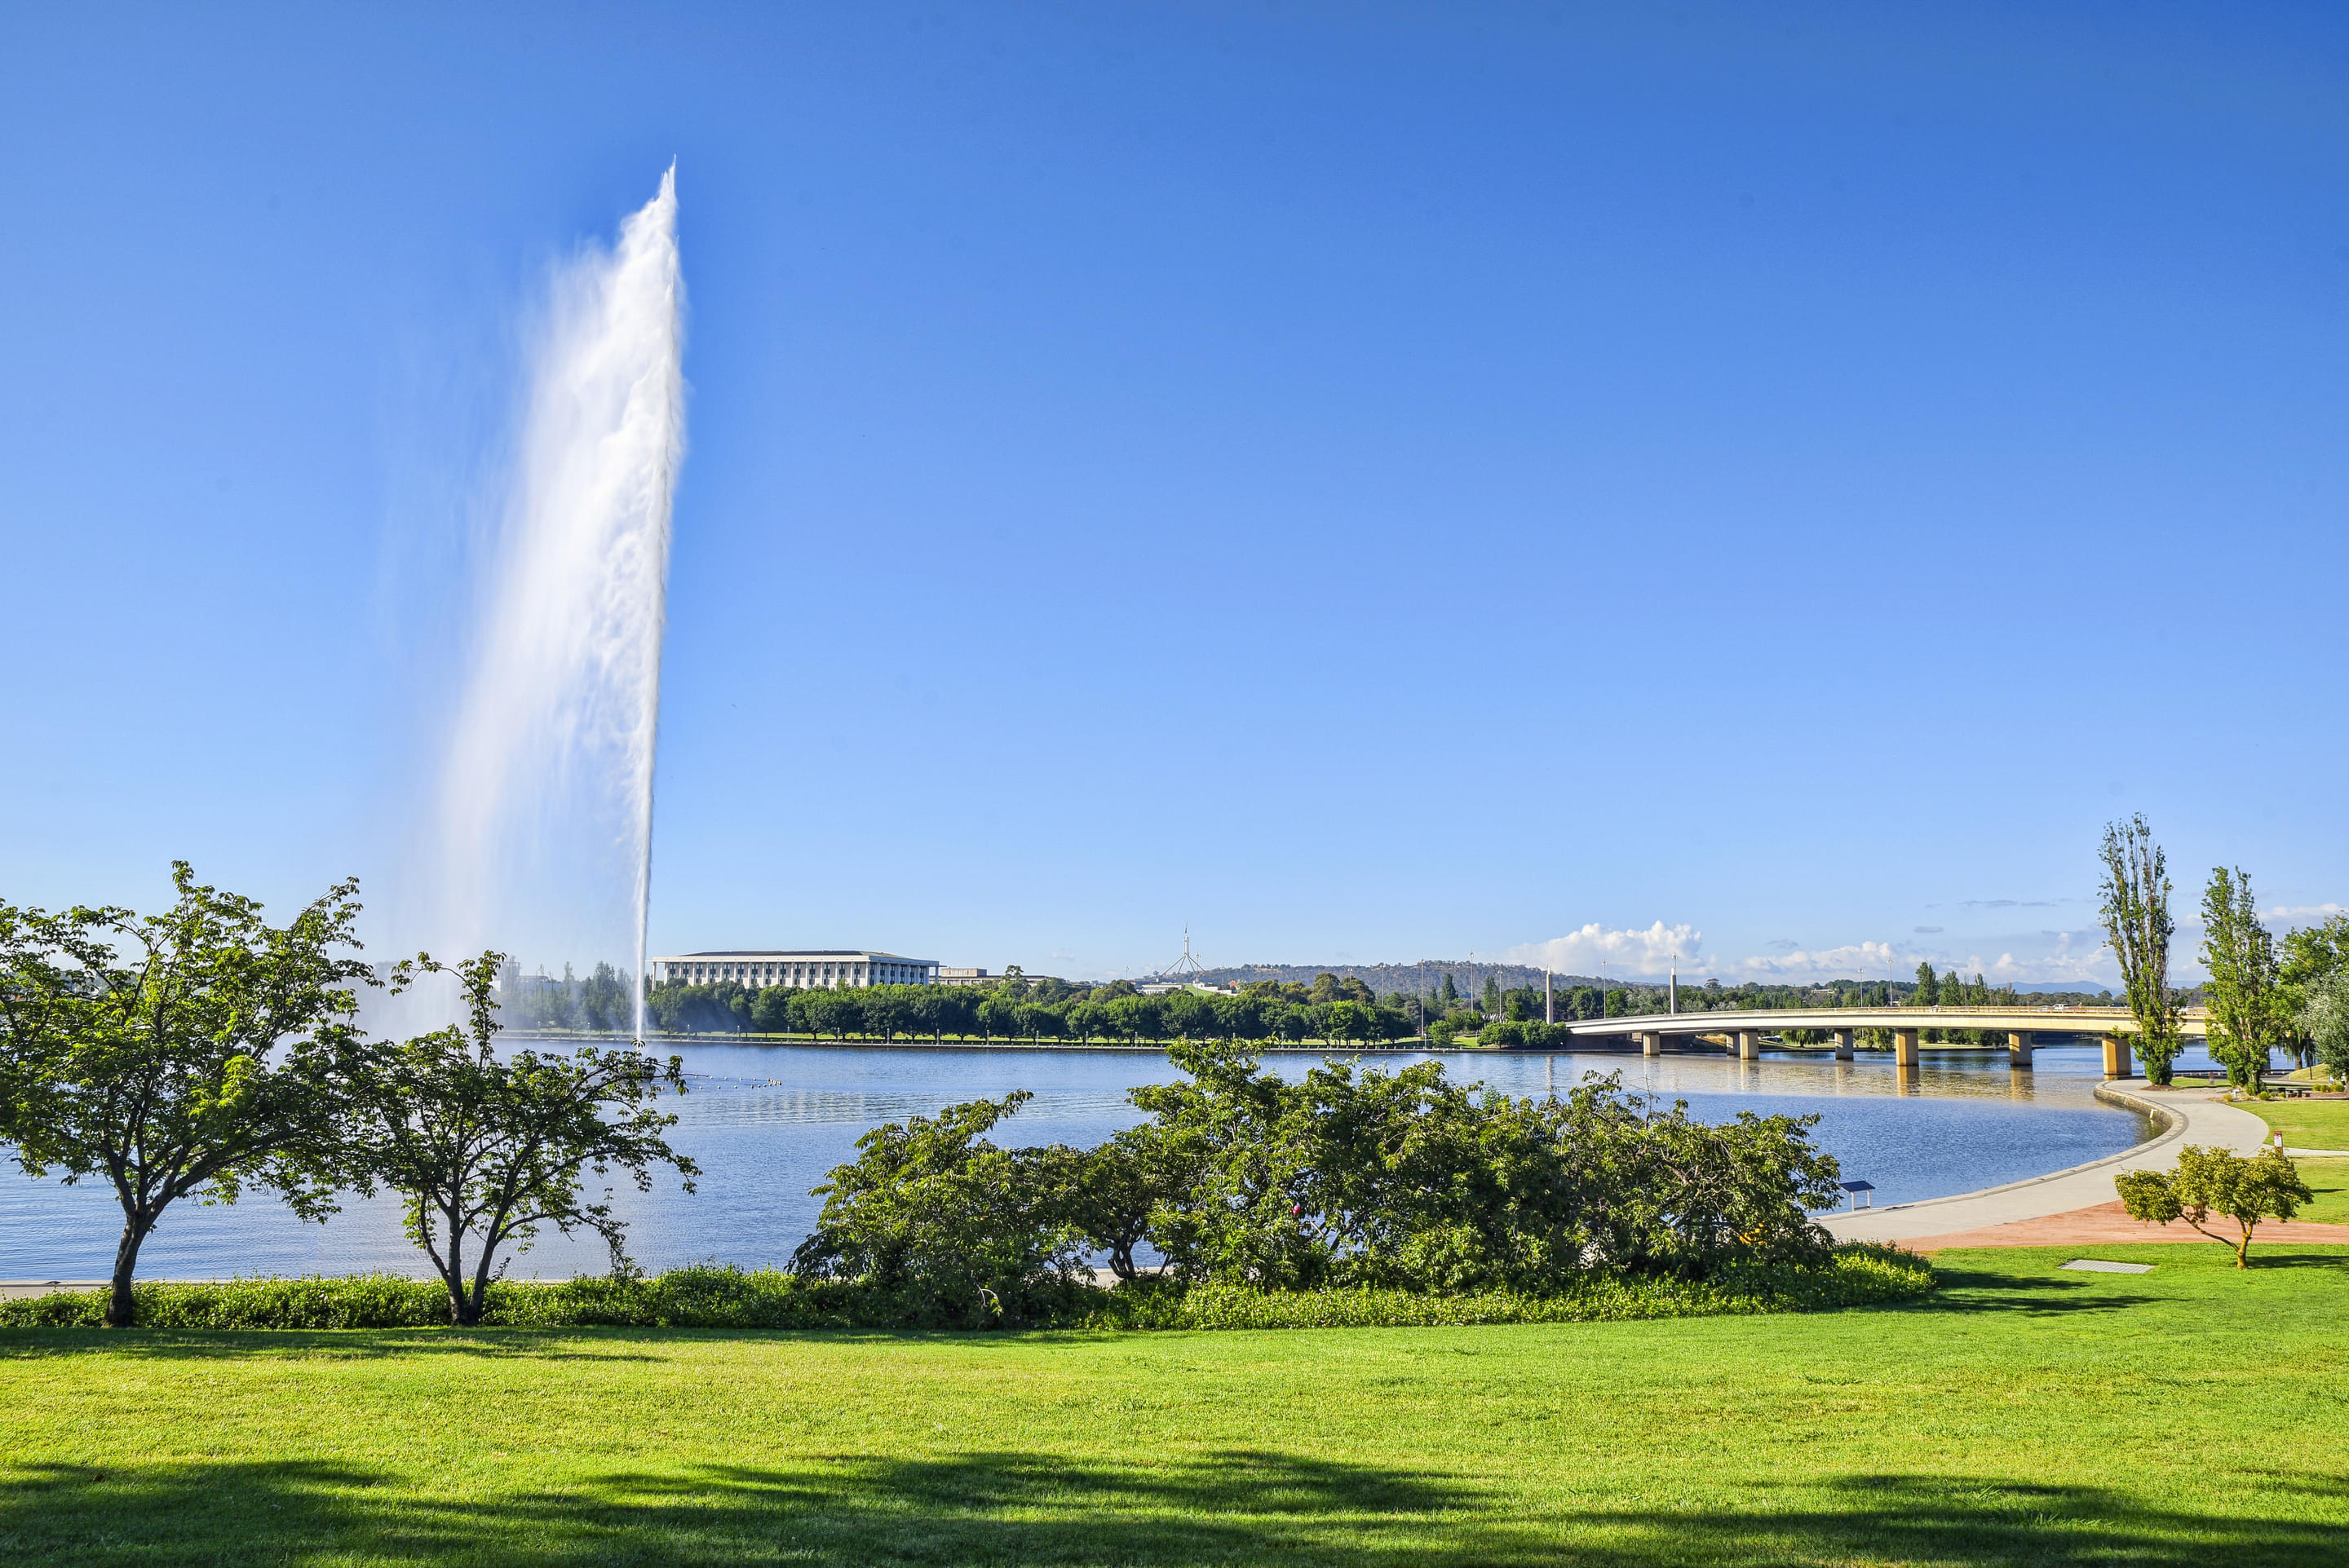 Lake Burley Griffin Overview